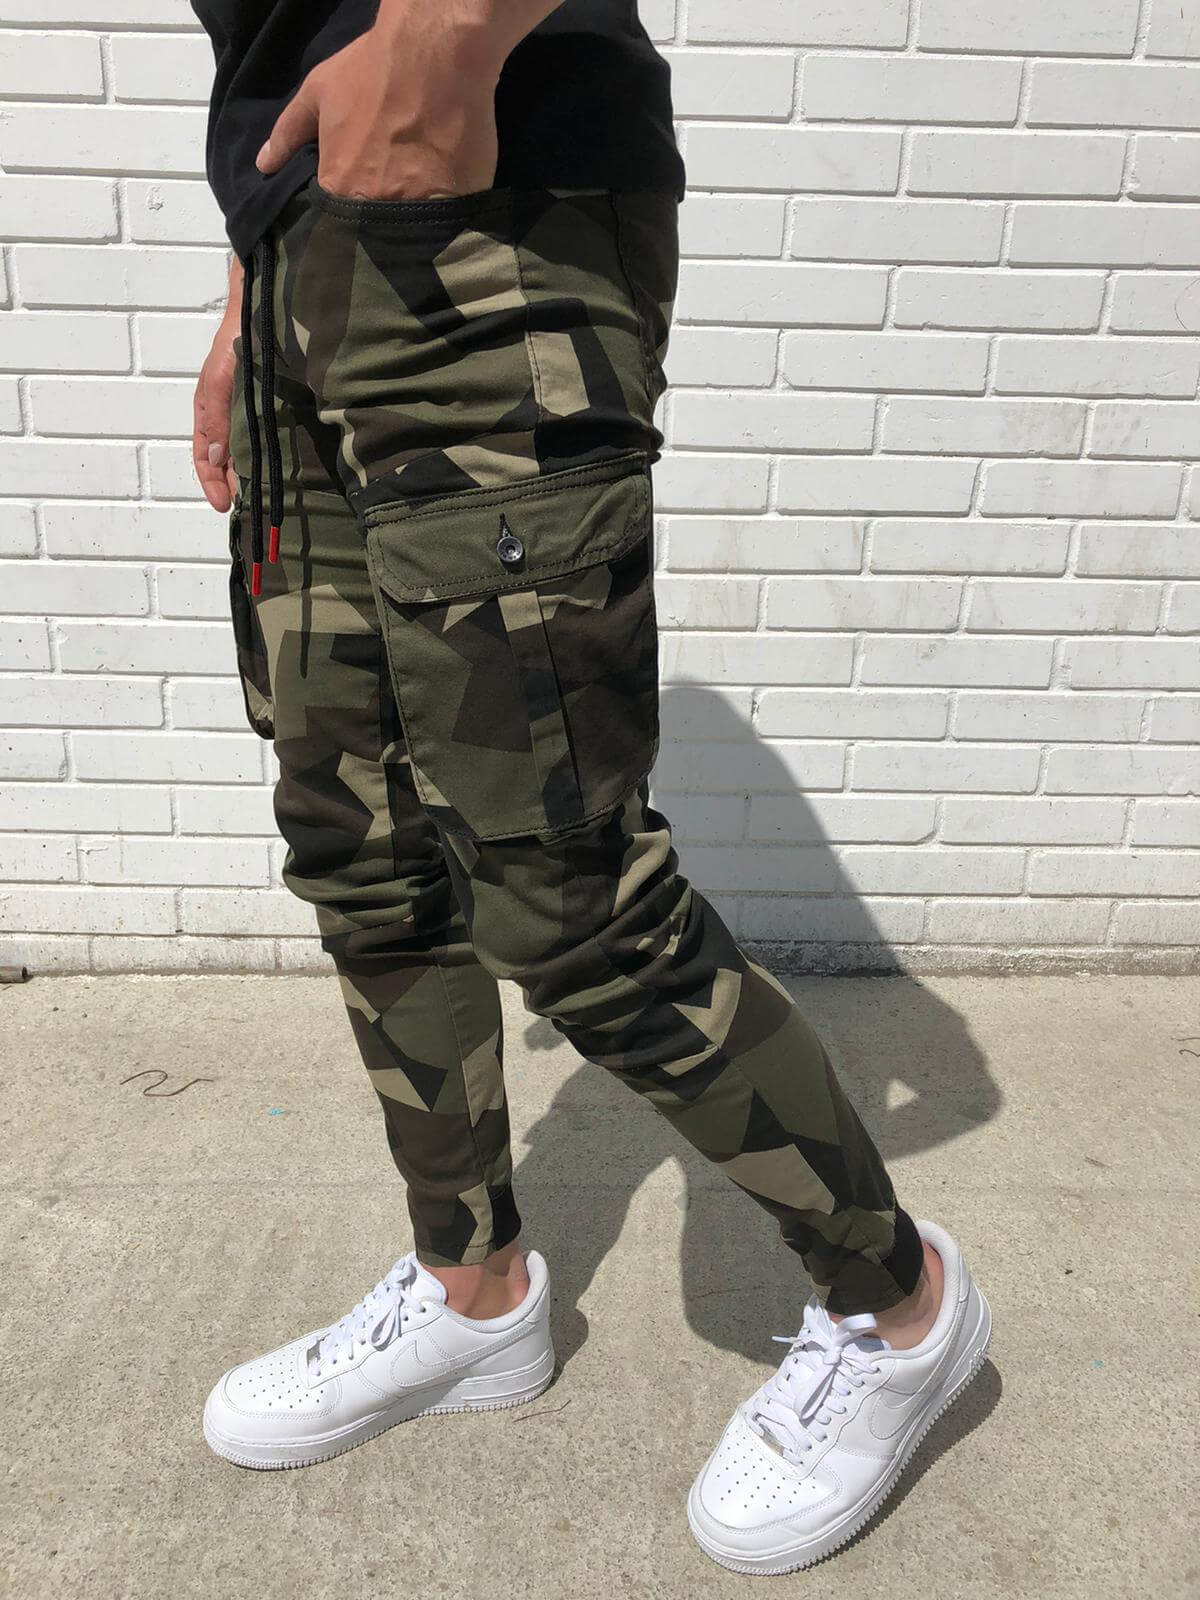 ALLRJ Check Camouflage Sweatpants Men'S Slim Trend Fashion Casual Pants With Feet